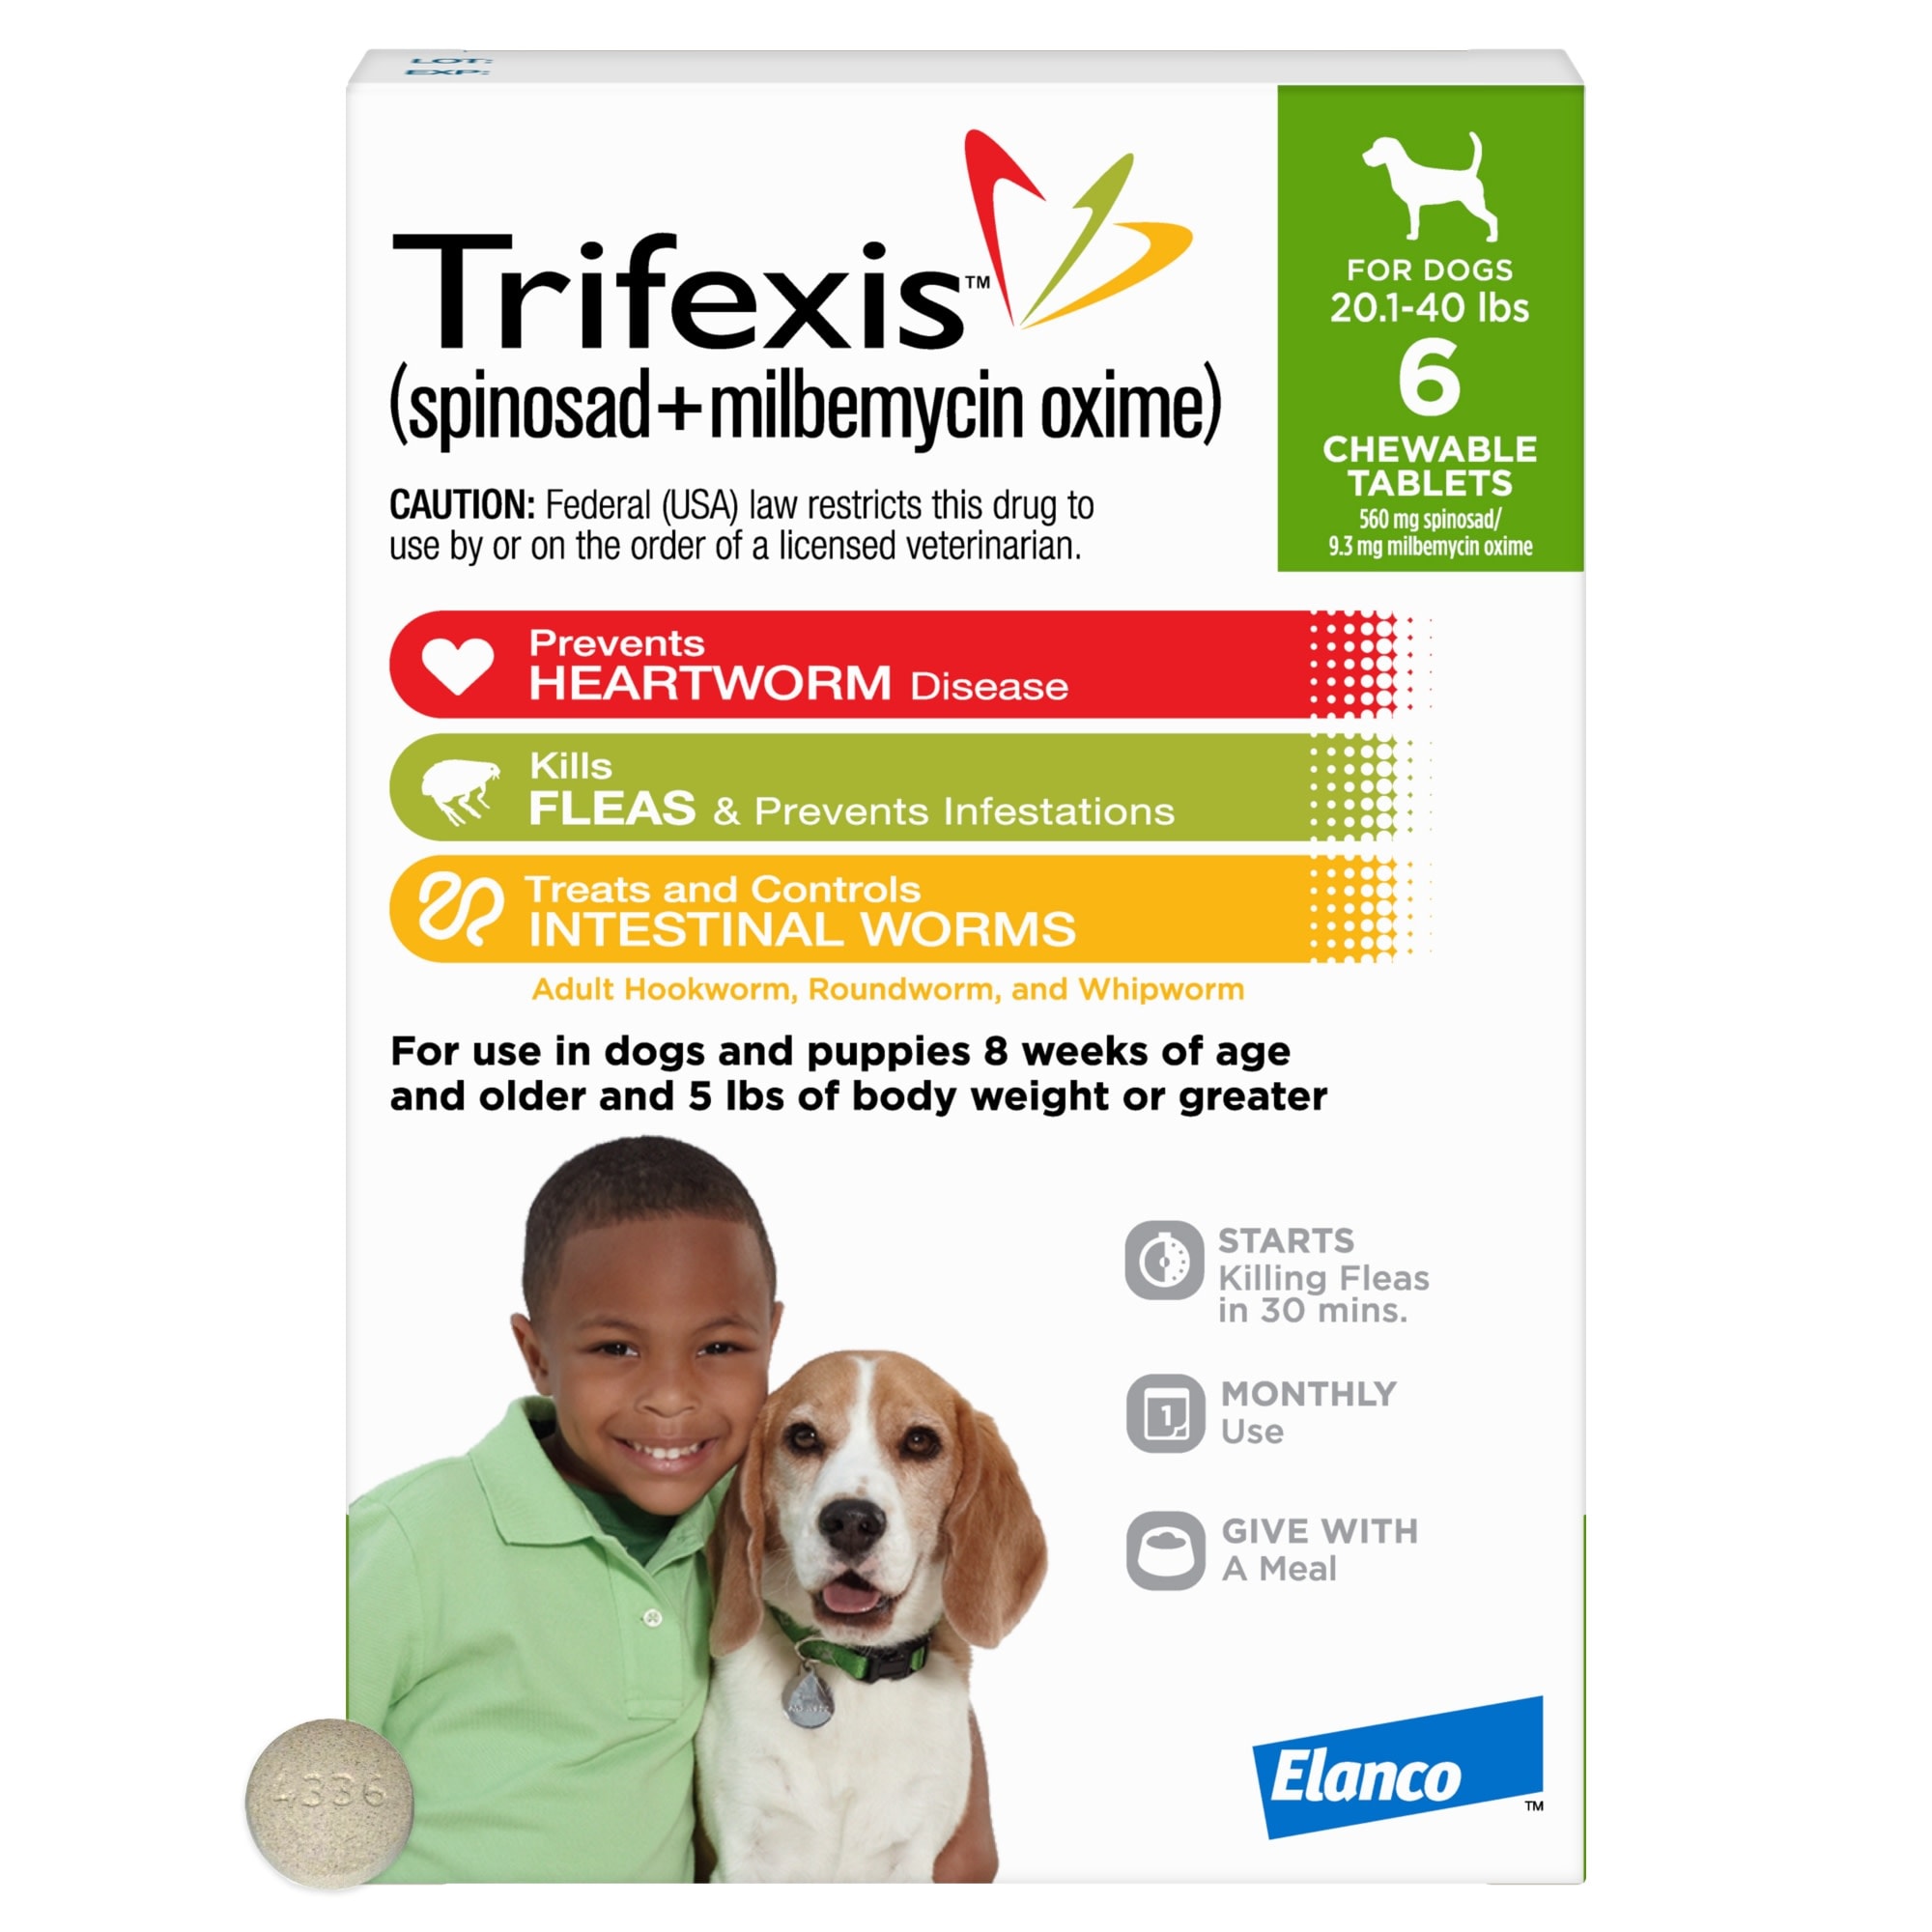 Trifexis Chewable Tablets for Dogs 20.1 